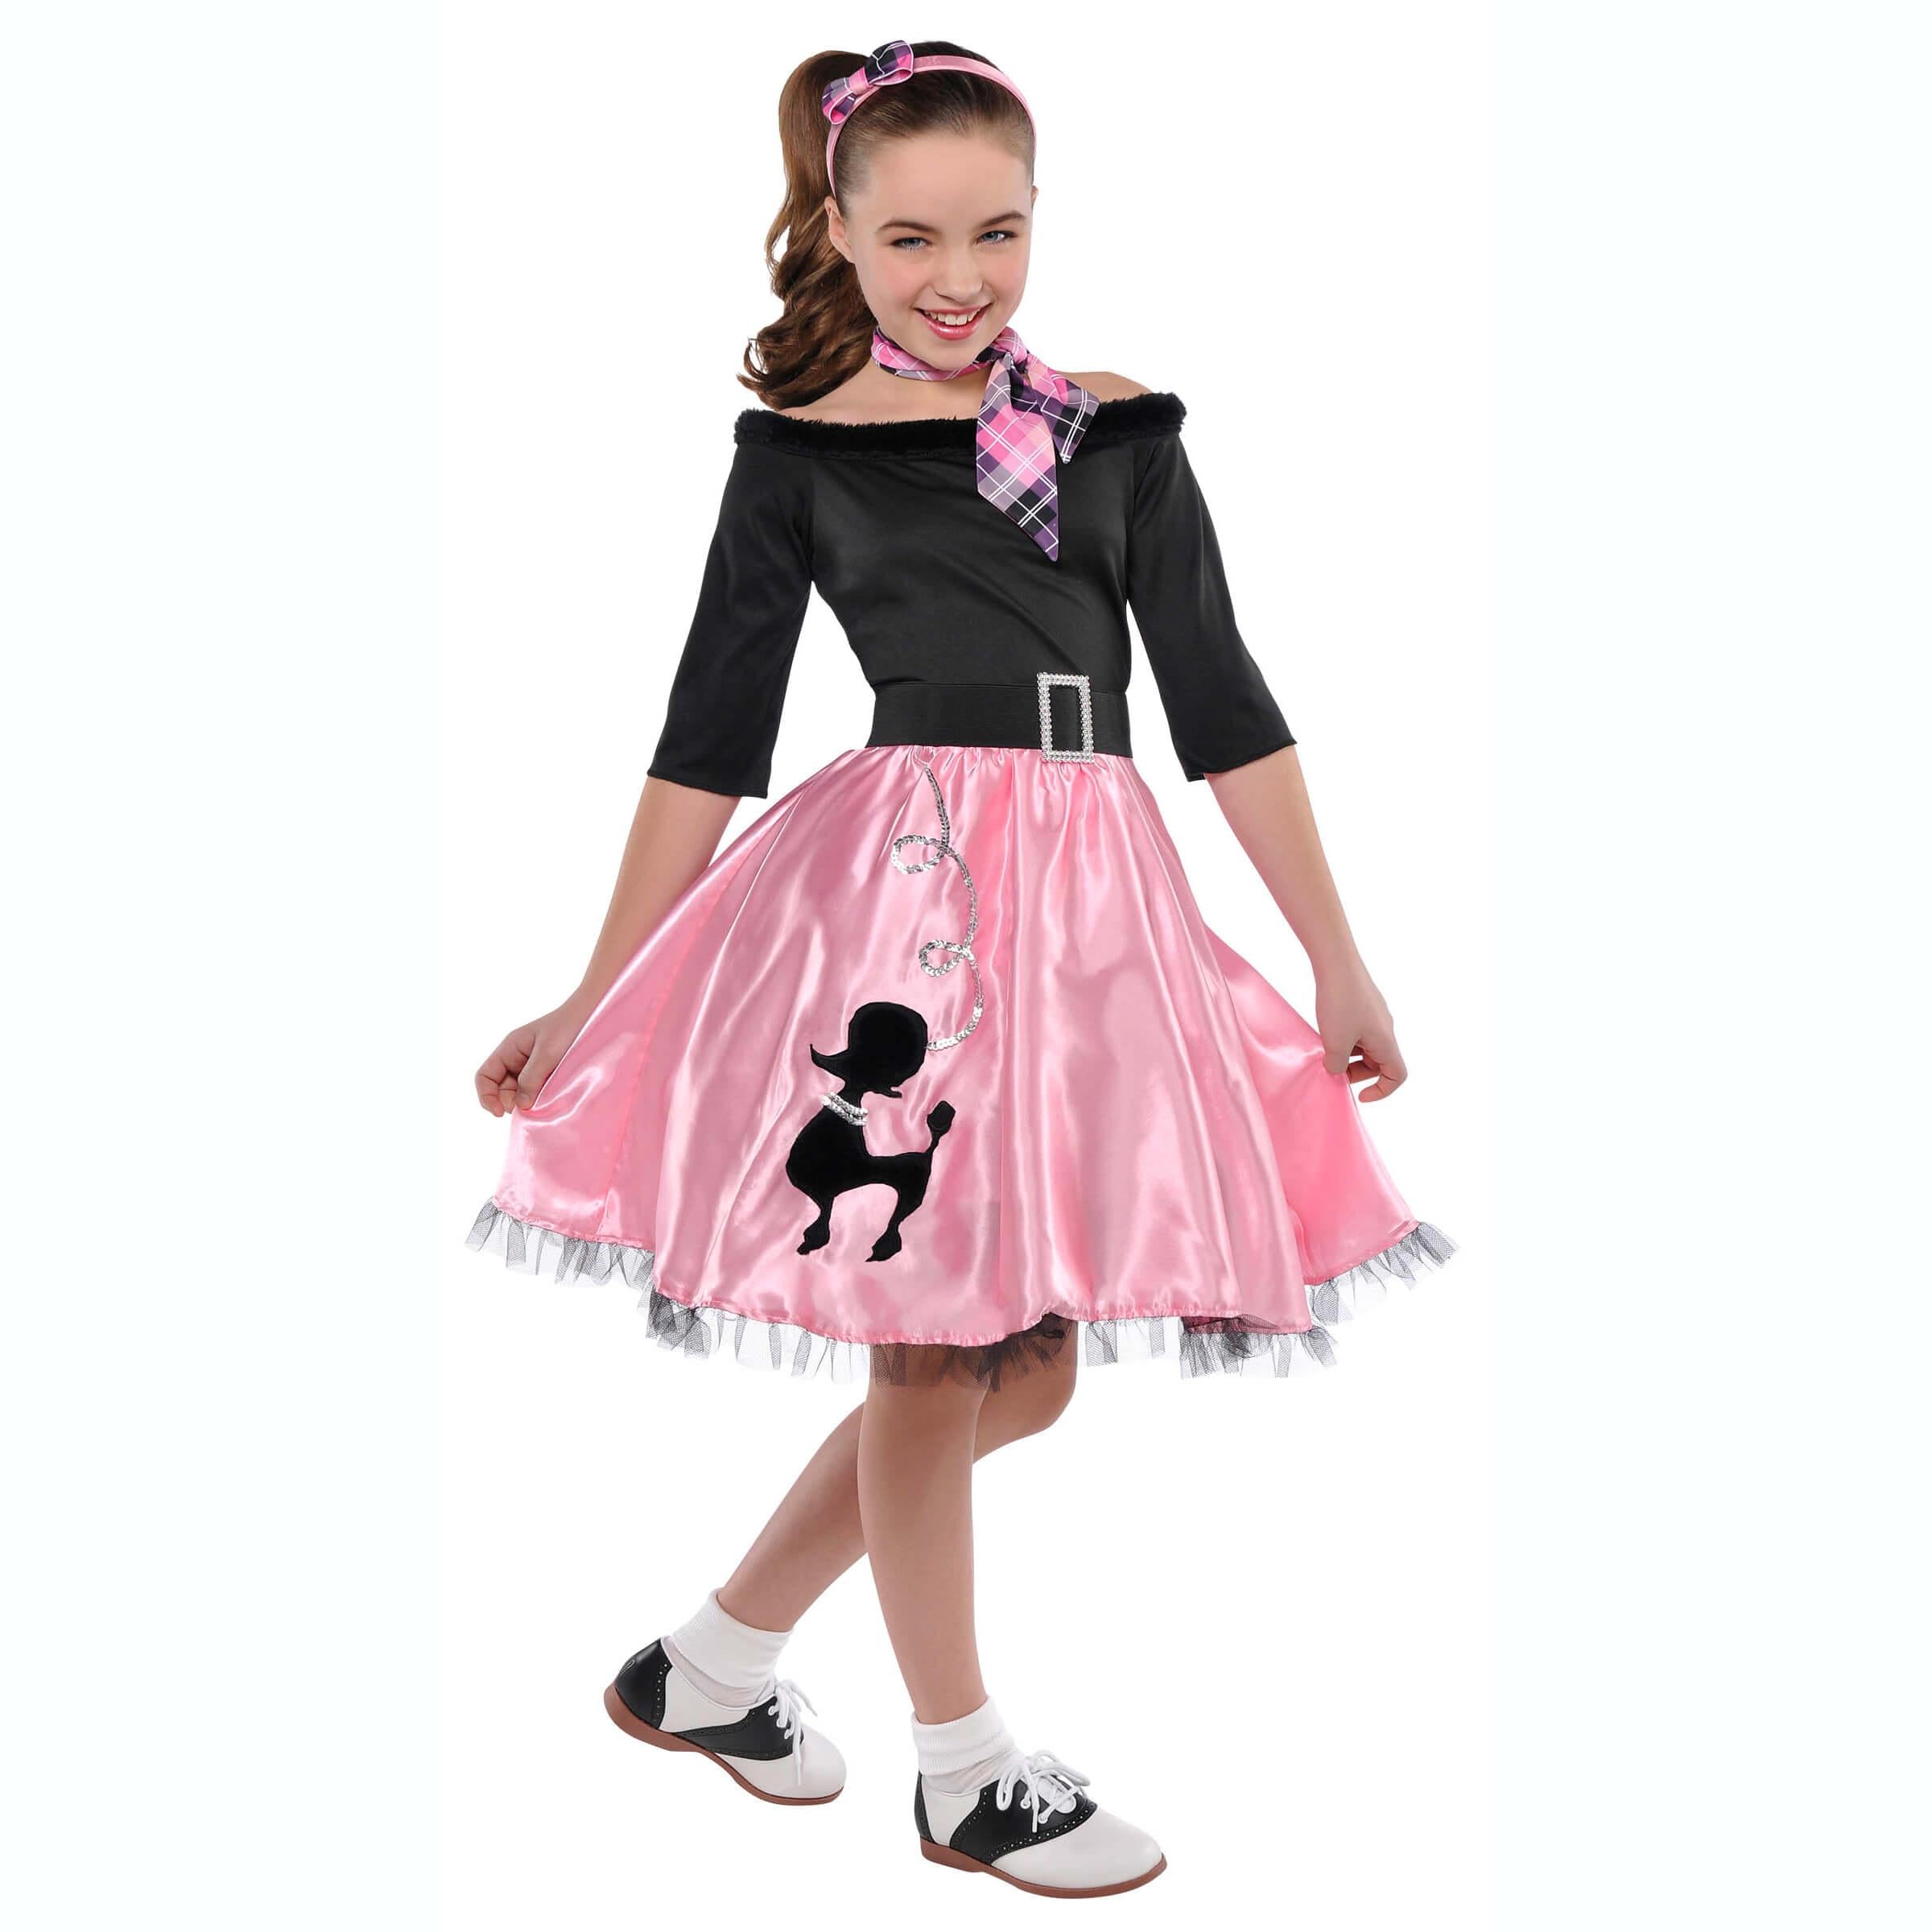 Child Miss Sock Hop 1950s Costume Costumes & Apparel - Party Centre - Party Centre